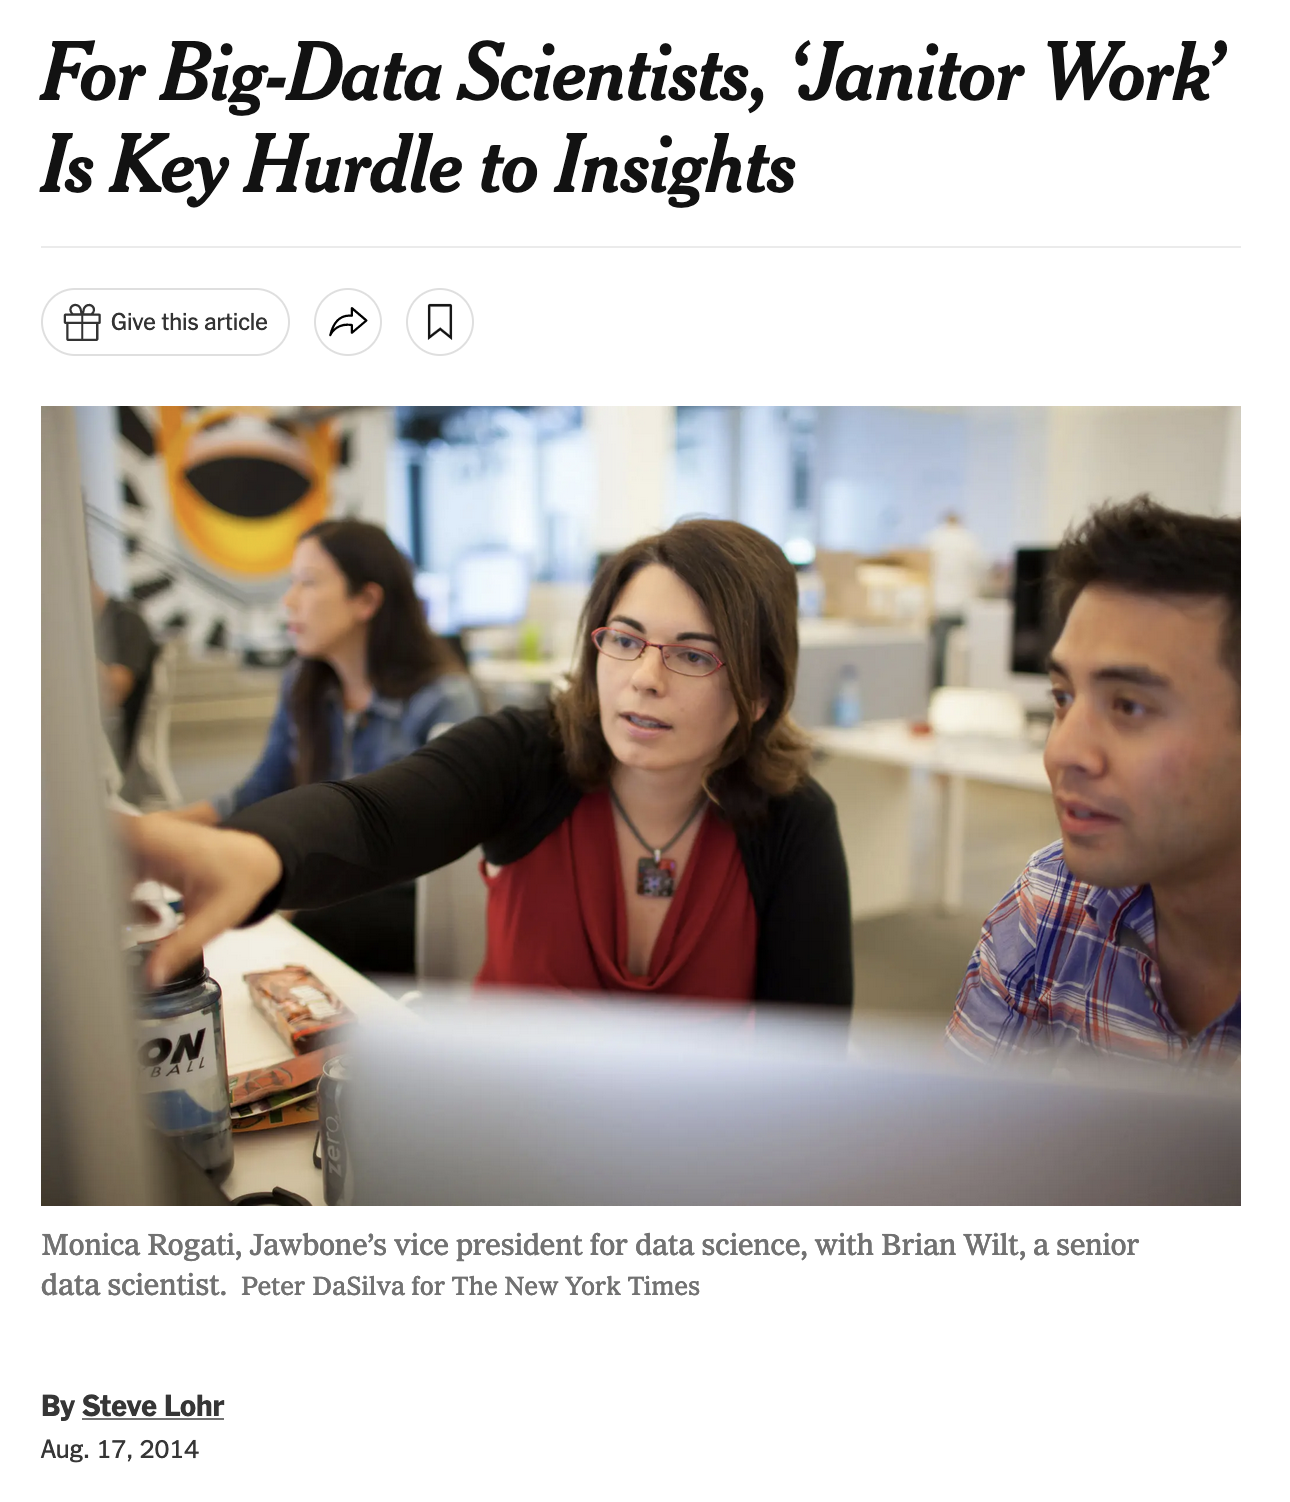 an nytimes article headline talking about janitor work in data science